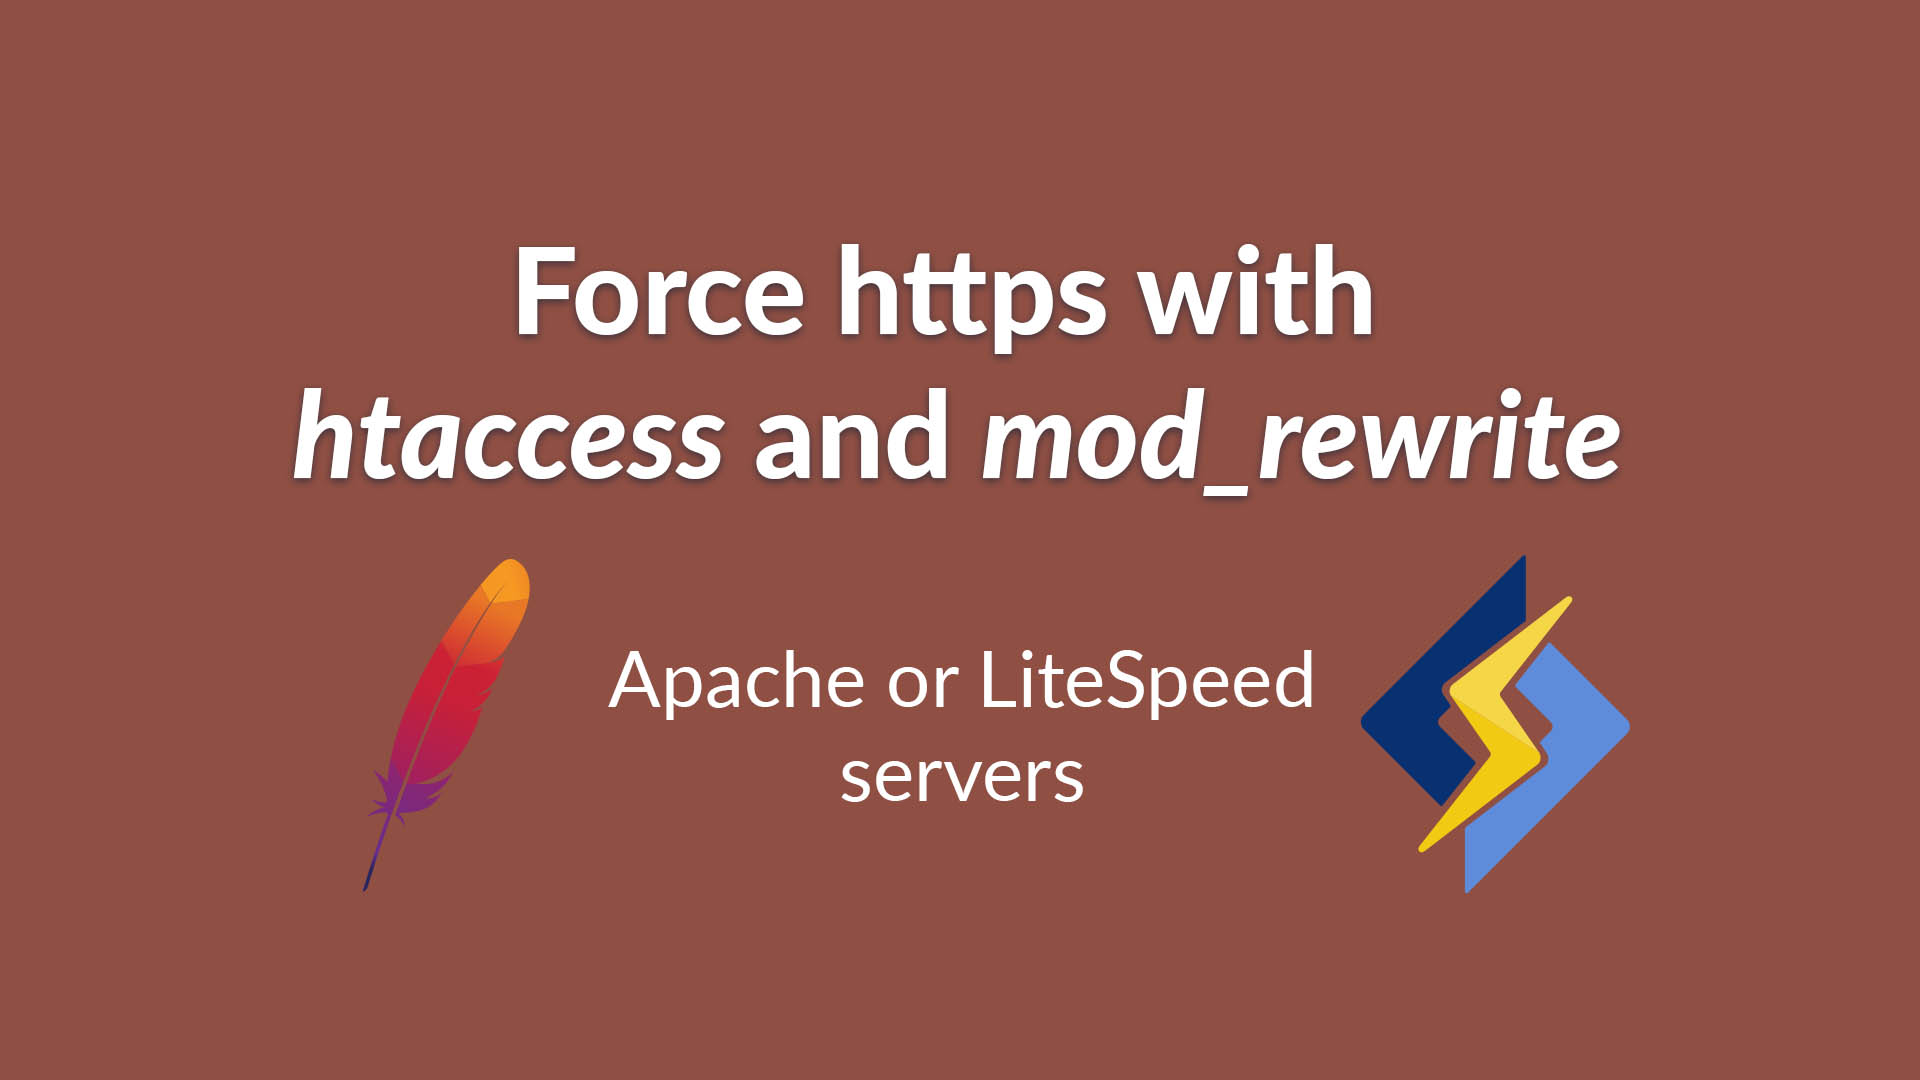 Redirect http to https: force https with htaccess